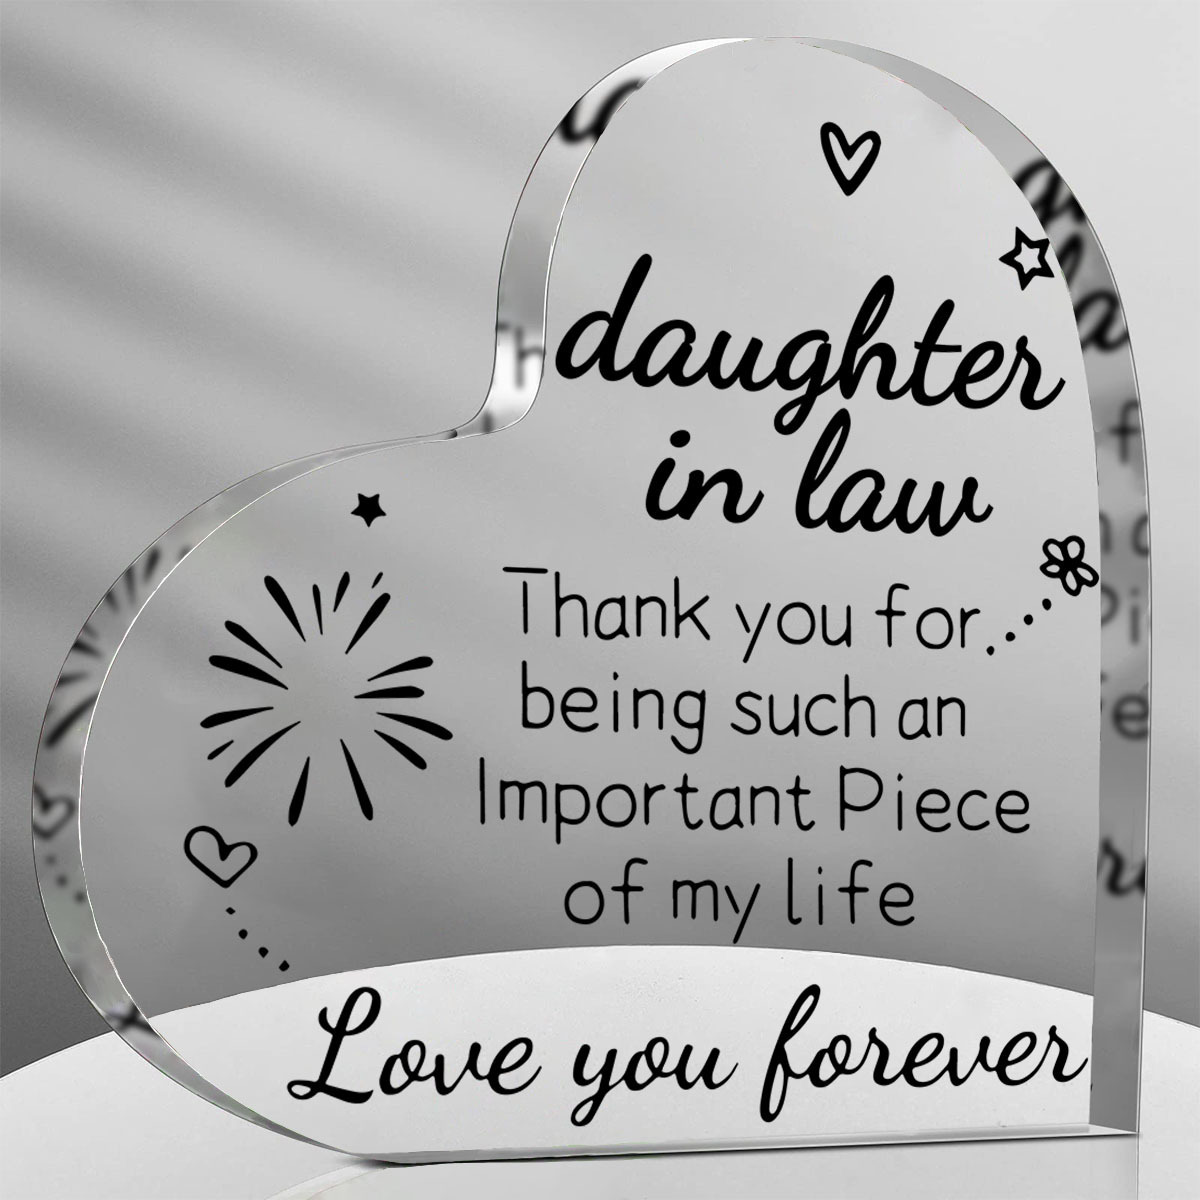 

1pc, Daughter In Law Gifts Acrylic Plaque With Sayings - Wedding Birthday Halloween Thanksgiving Christmas Day Gifts For Daughter In Law - Desk Decorations Card Gifts For Daughter In Law